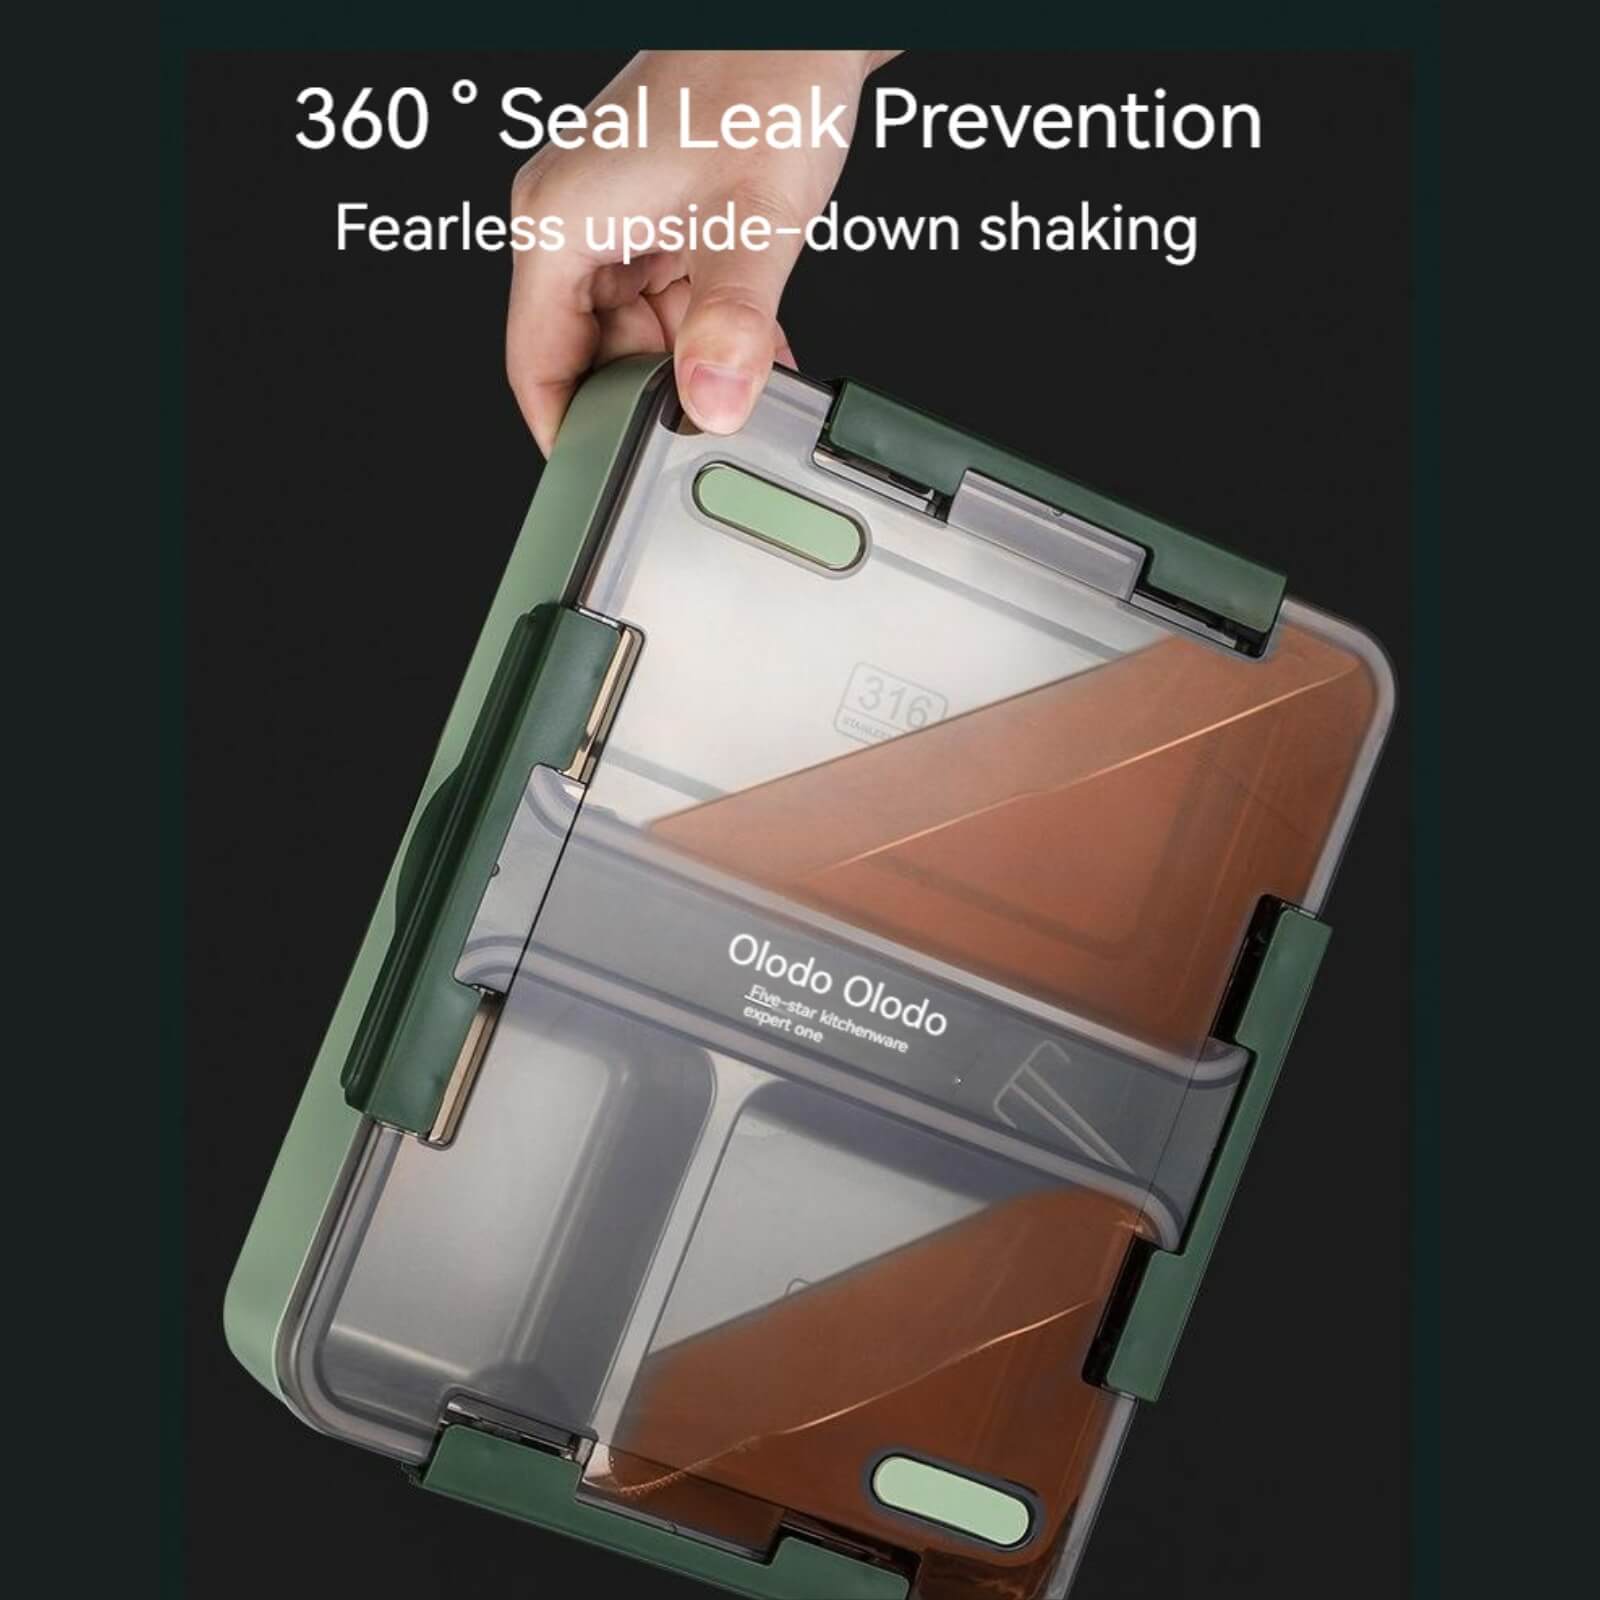 Sealed and leakproof lunchbox in green